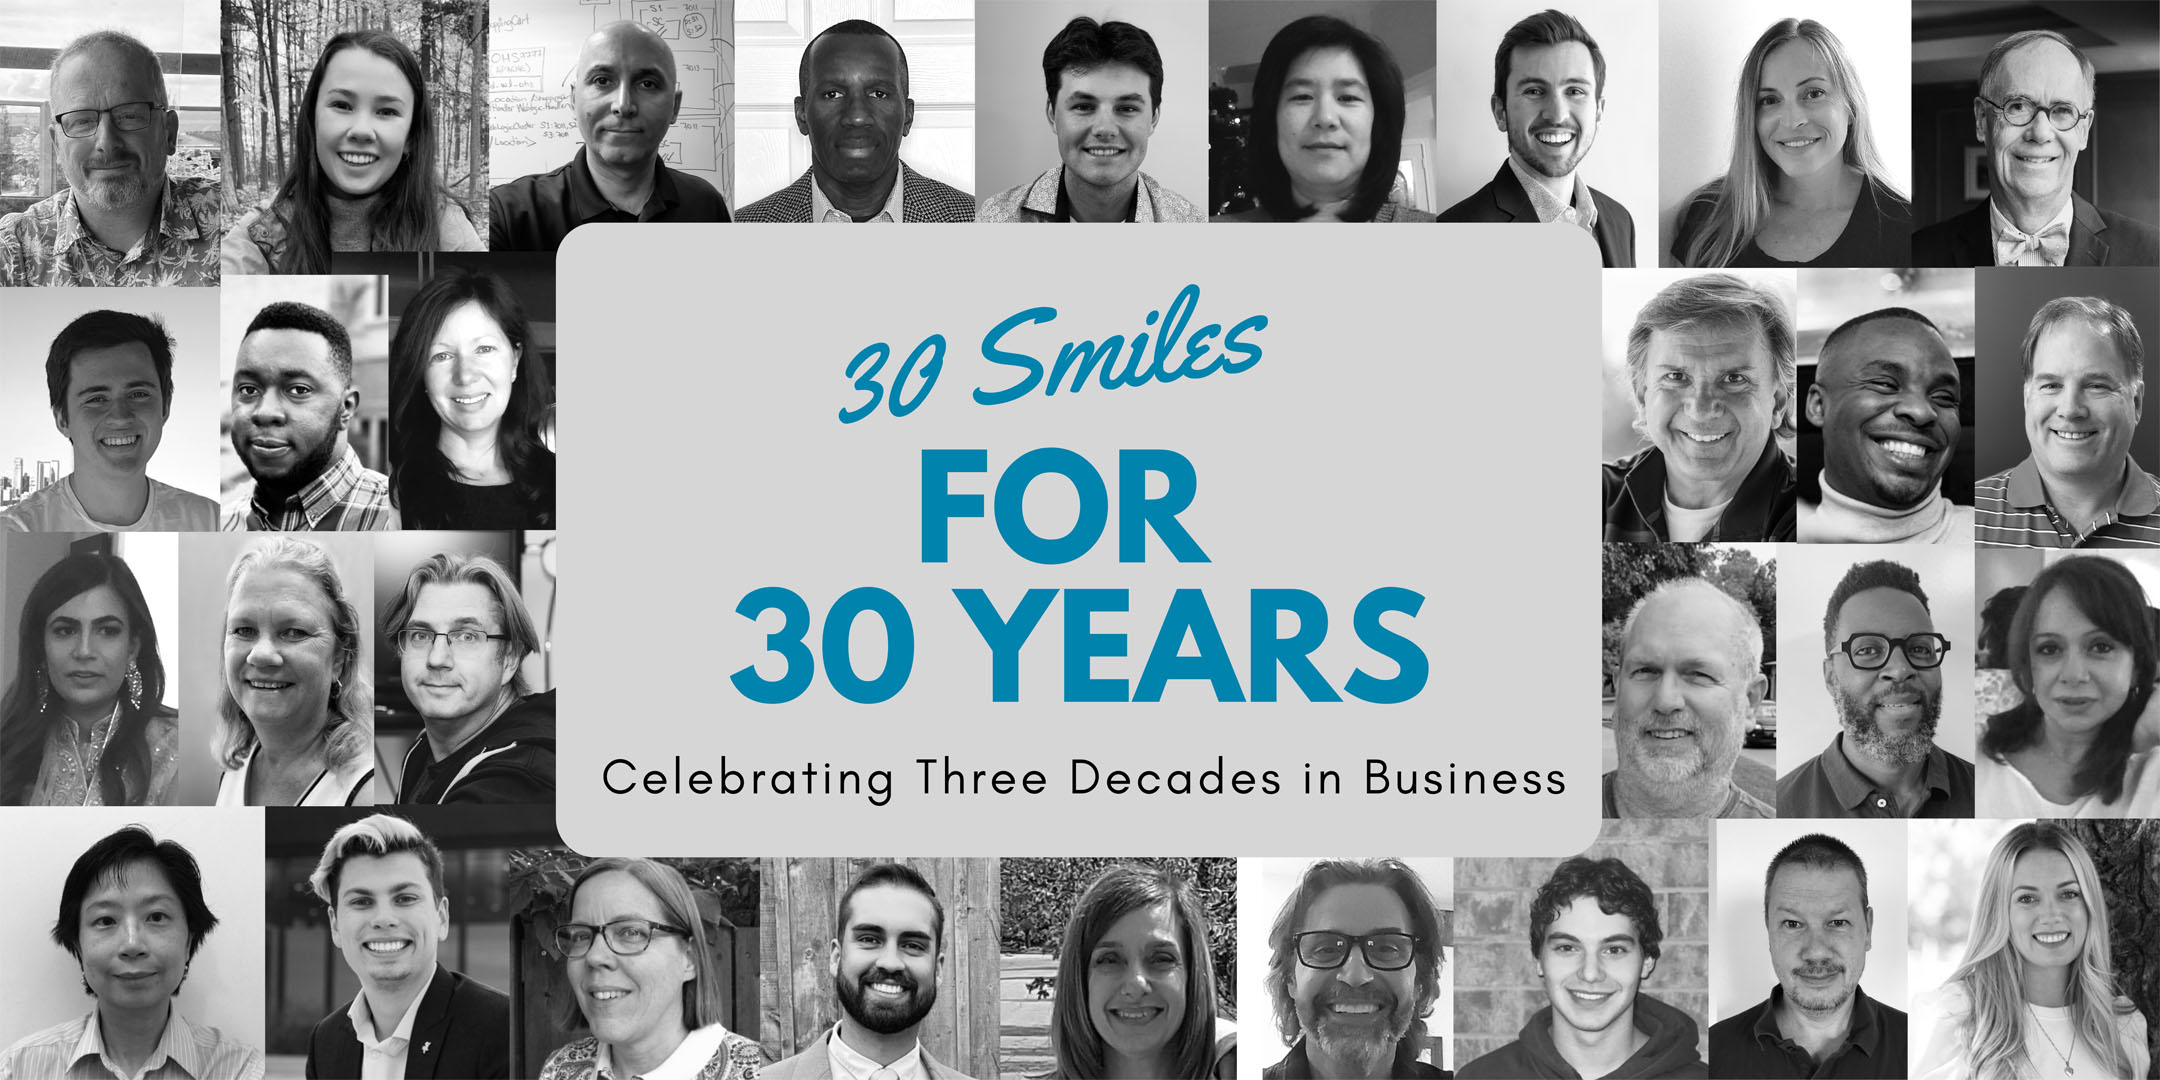 30 Smiles for 30 years in Business